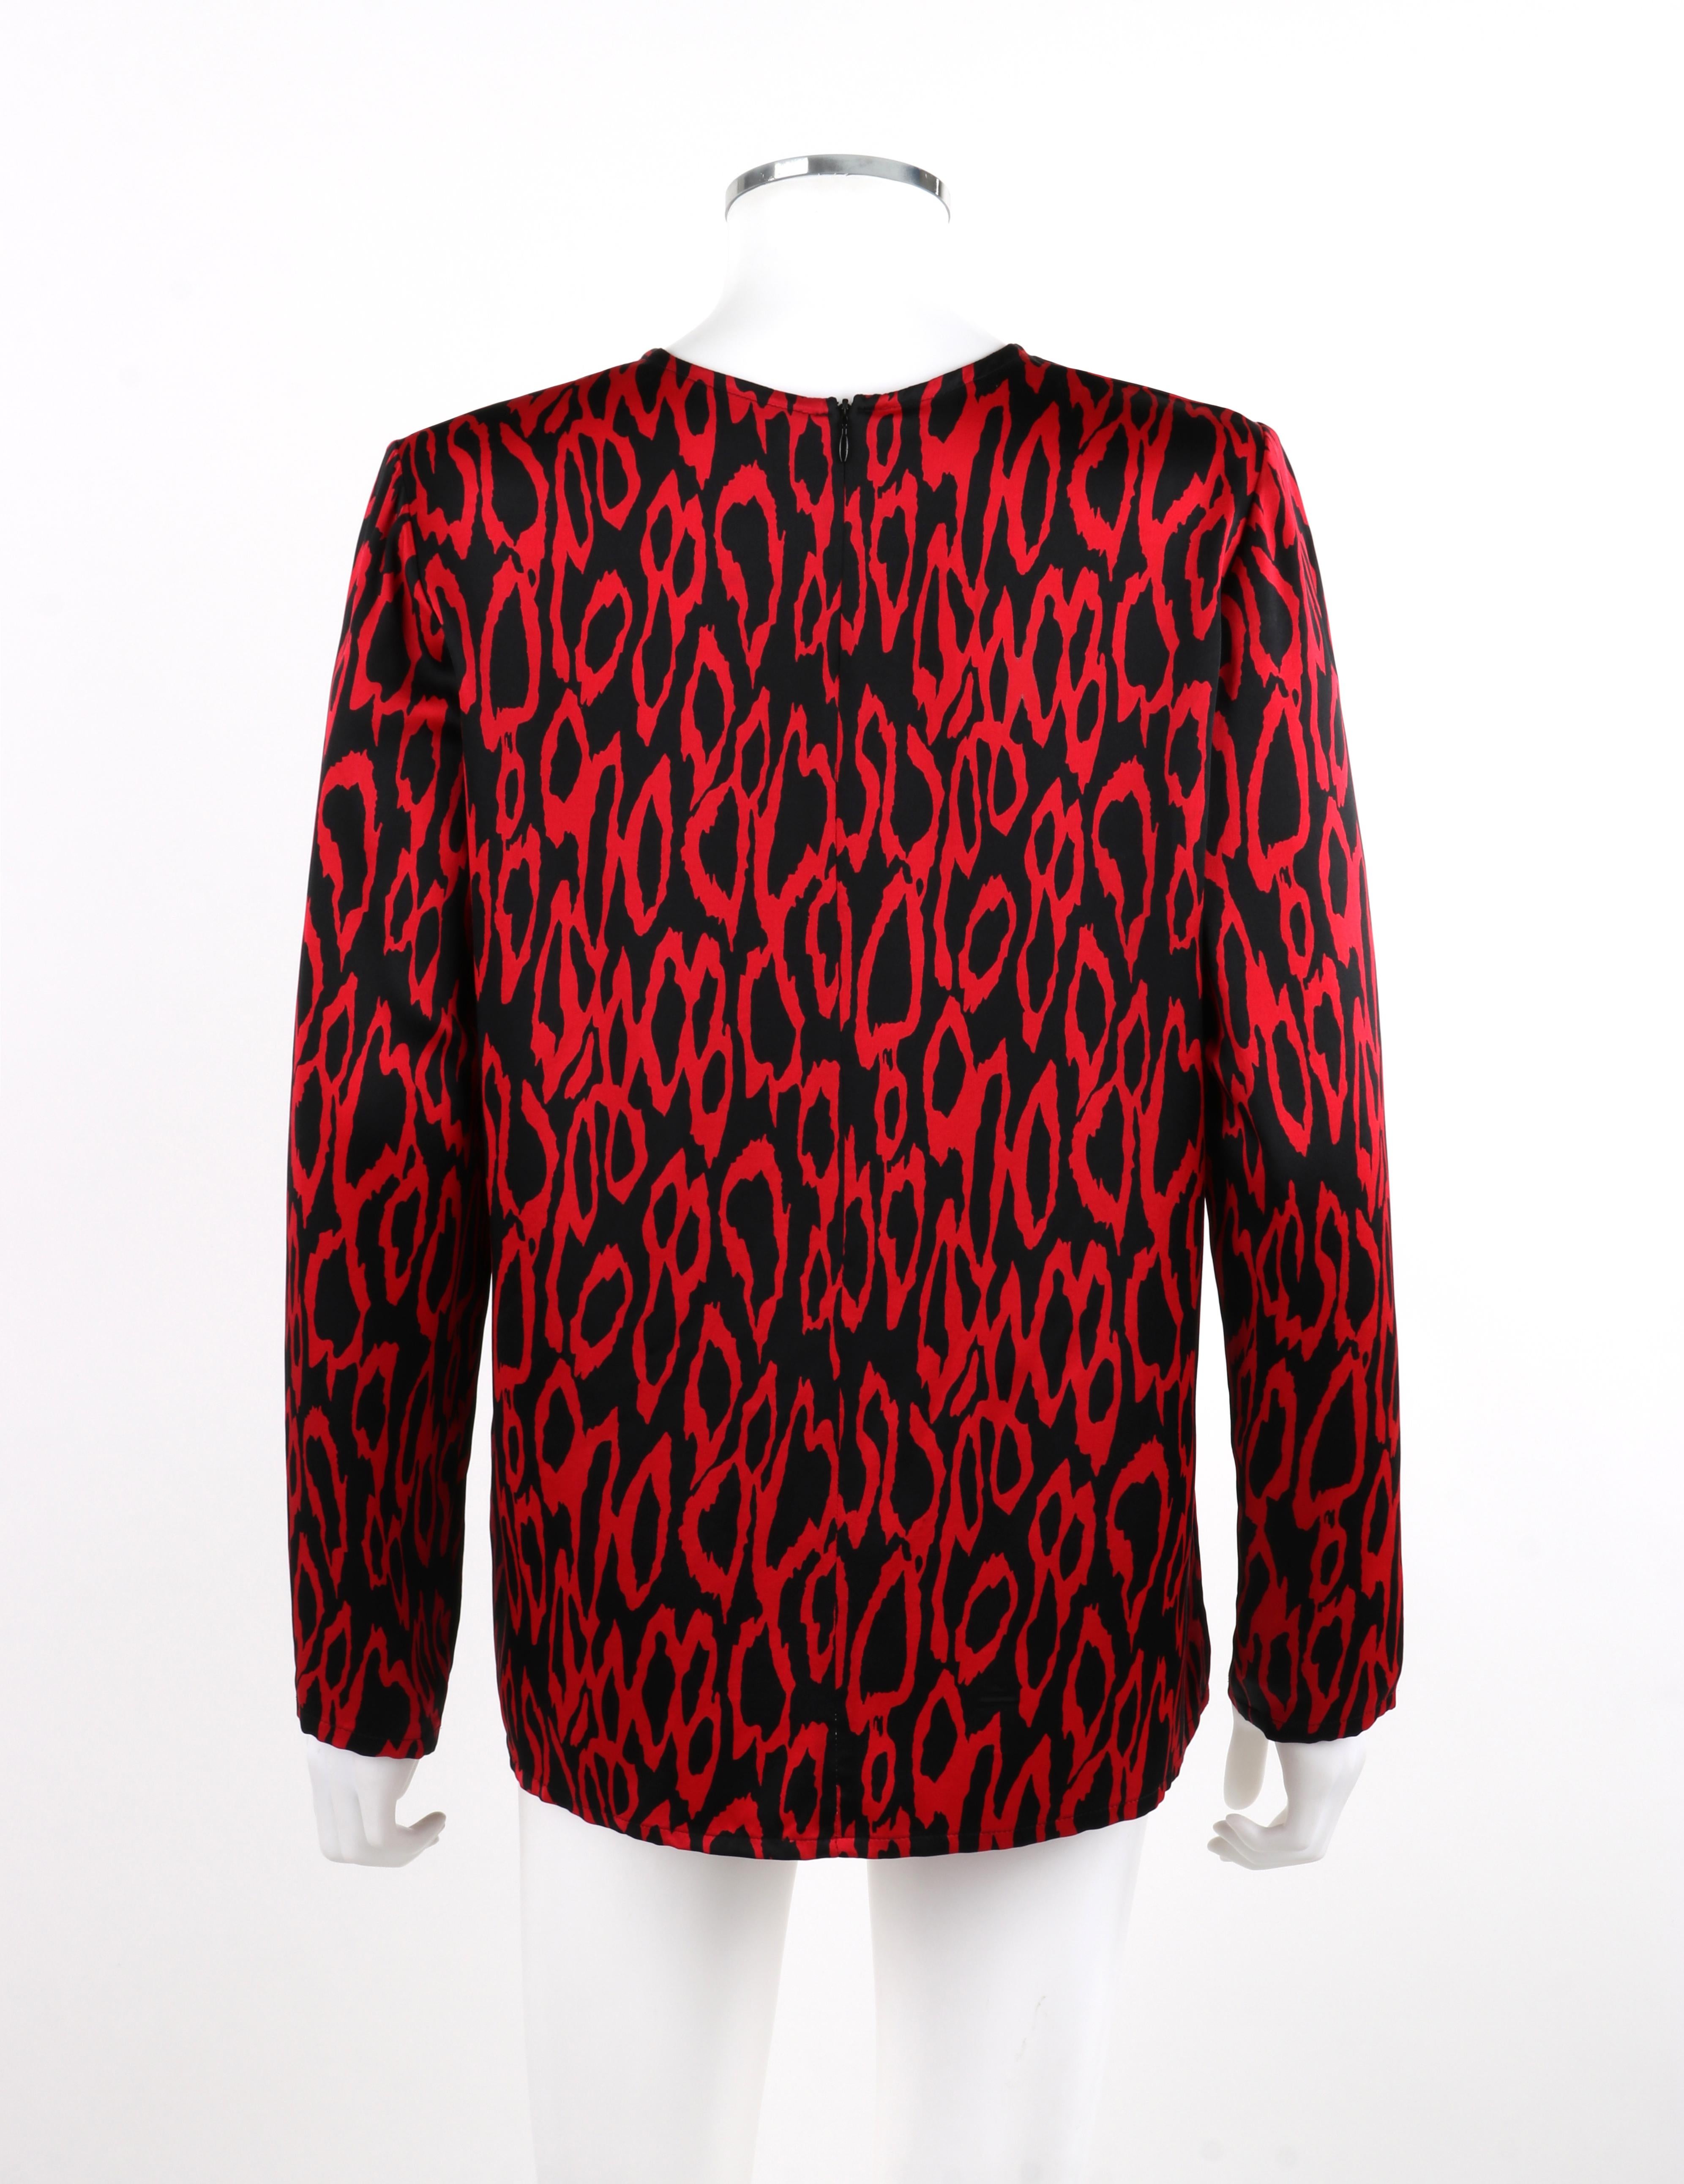 GIVENCHY Boutiques c.1980's Red Black Abstract Print Silk Long Sleeve Blouse Top In Good Condition For Sale In Thiensville, WI